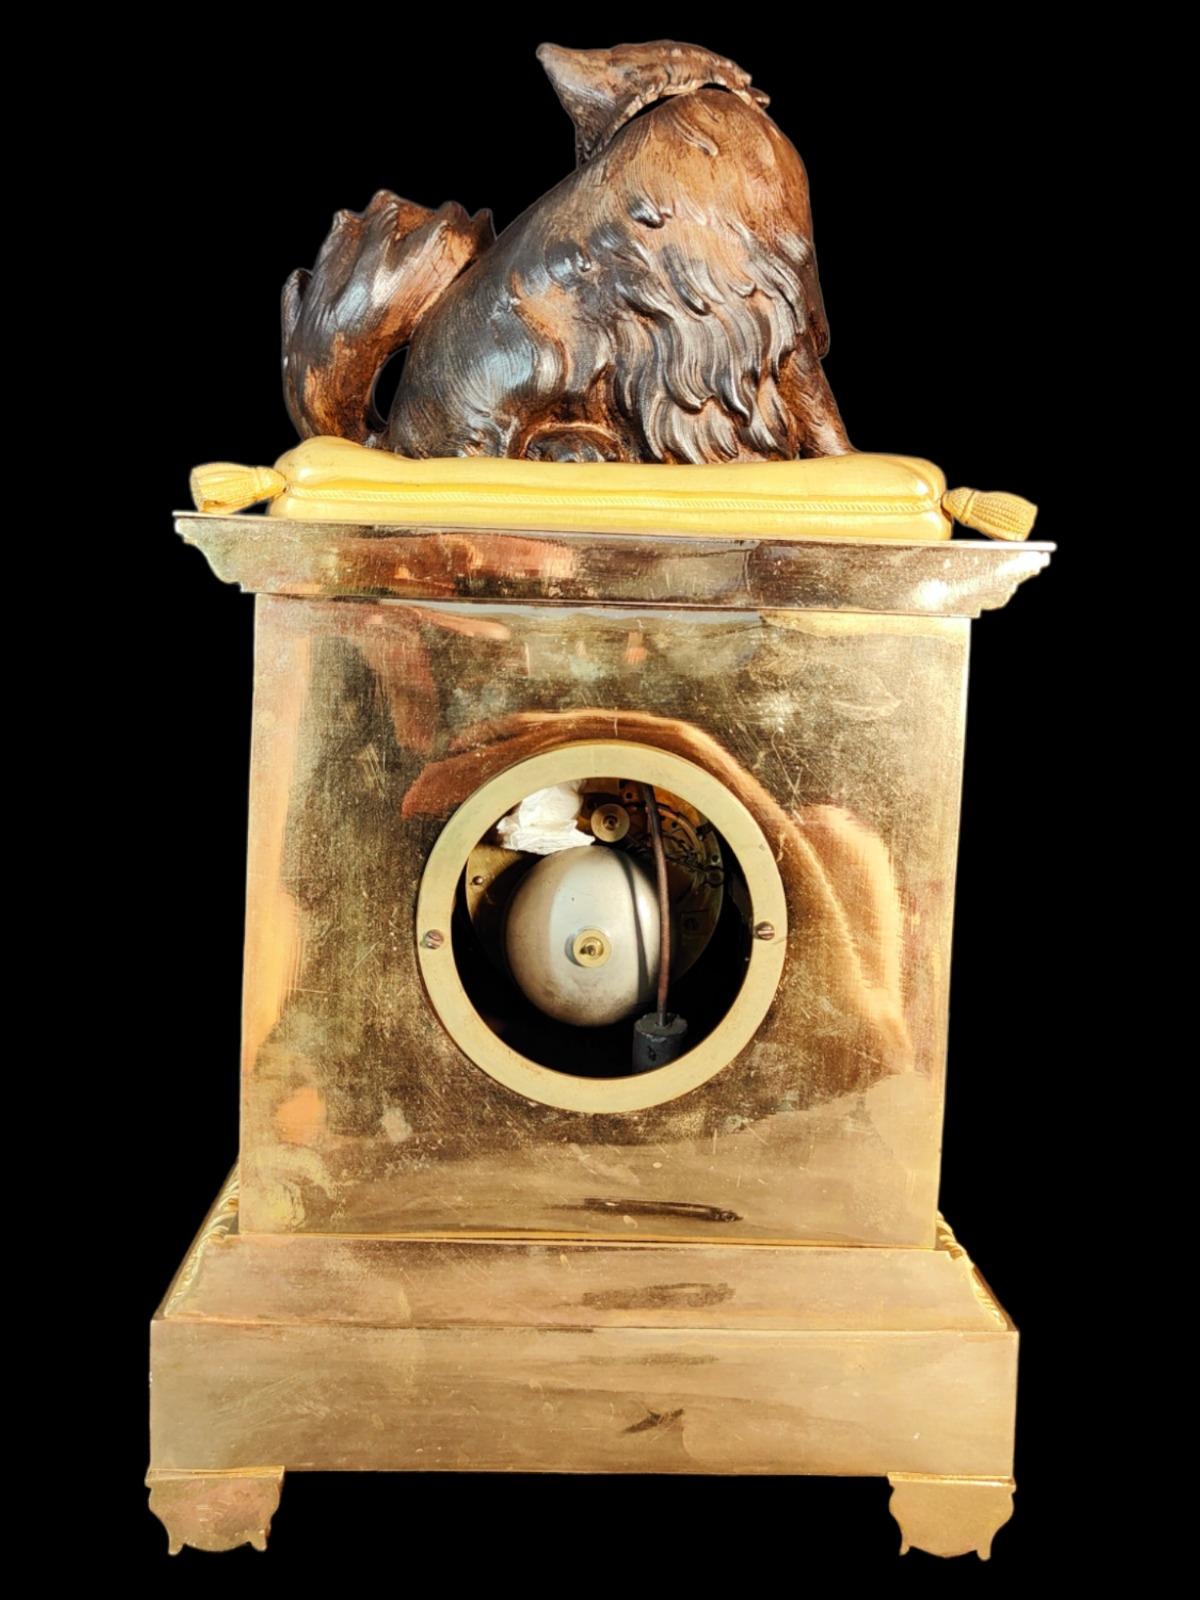 Early 1800 automaton clock
AUTOMATED CLOCK EARLY 1800 .BEAUTIFUL AND RARE CLOCK WITH A SEPARATE MECHANISM TO MOVE THE CAT'S HEAD IN A DIRECTION THAT APPEARS THAT A PAW IS LICKED. THE CAT'S HEAD IS CONNECTED TO A SEPARATE MECHANISM WHICH REPRODUCES